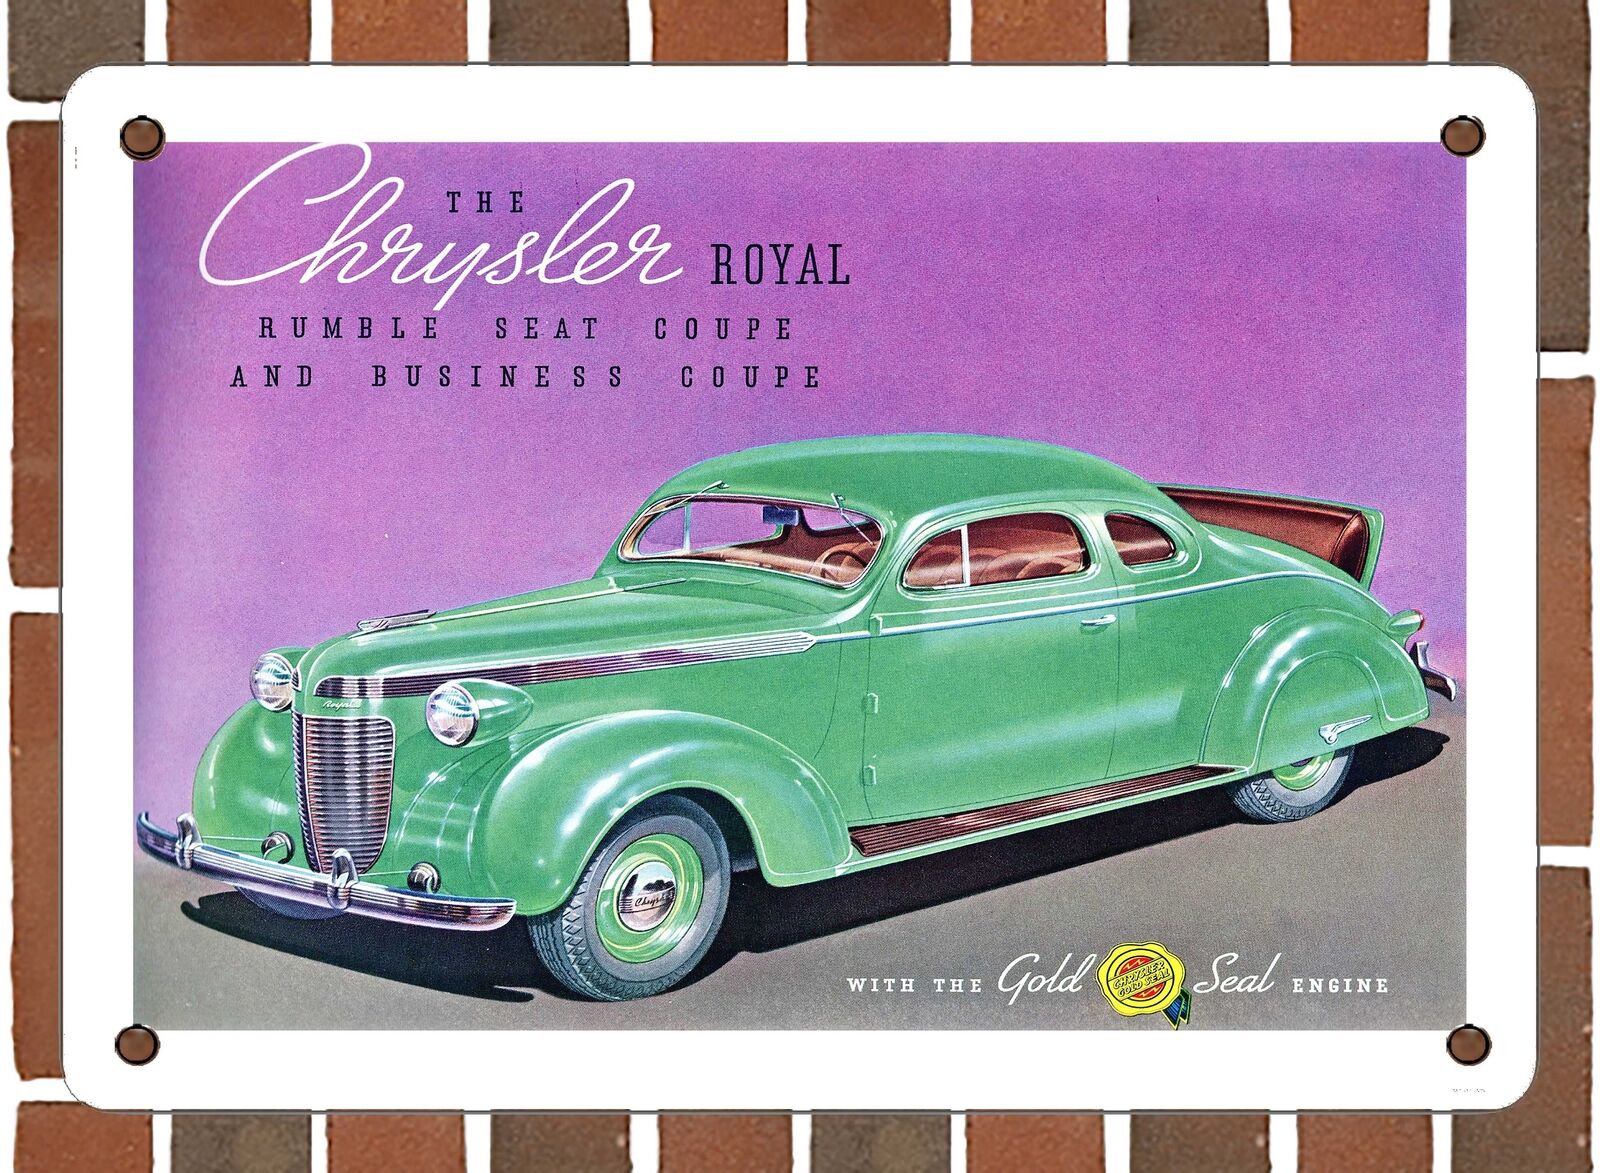 METAL SIGN - 1937 Chrysler Royal Rumble Seat Coupe - 10x14 Inches